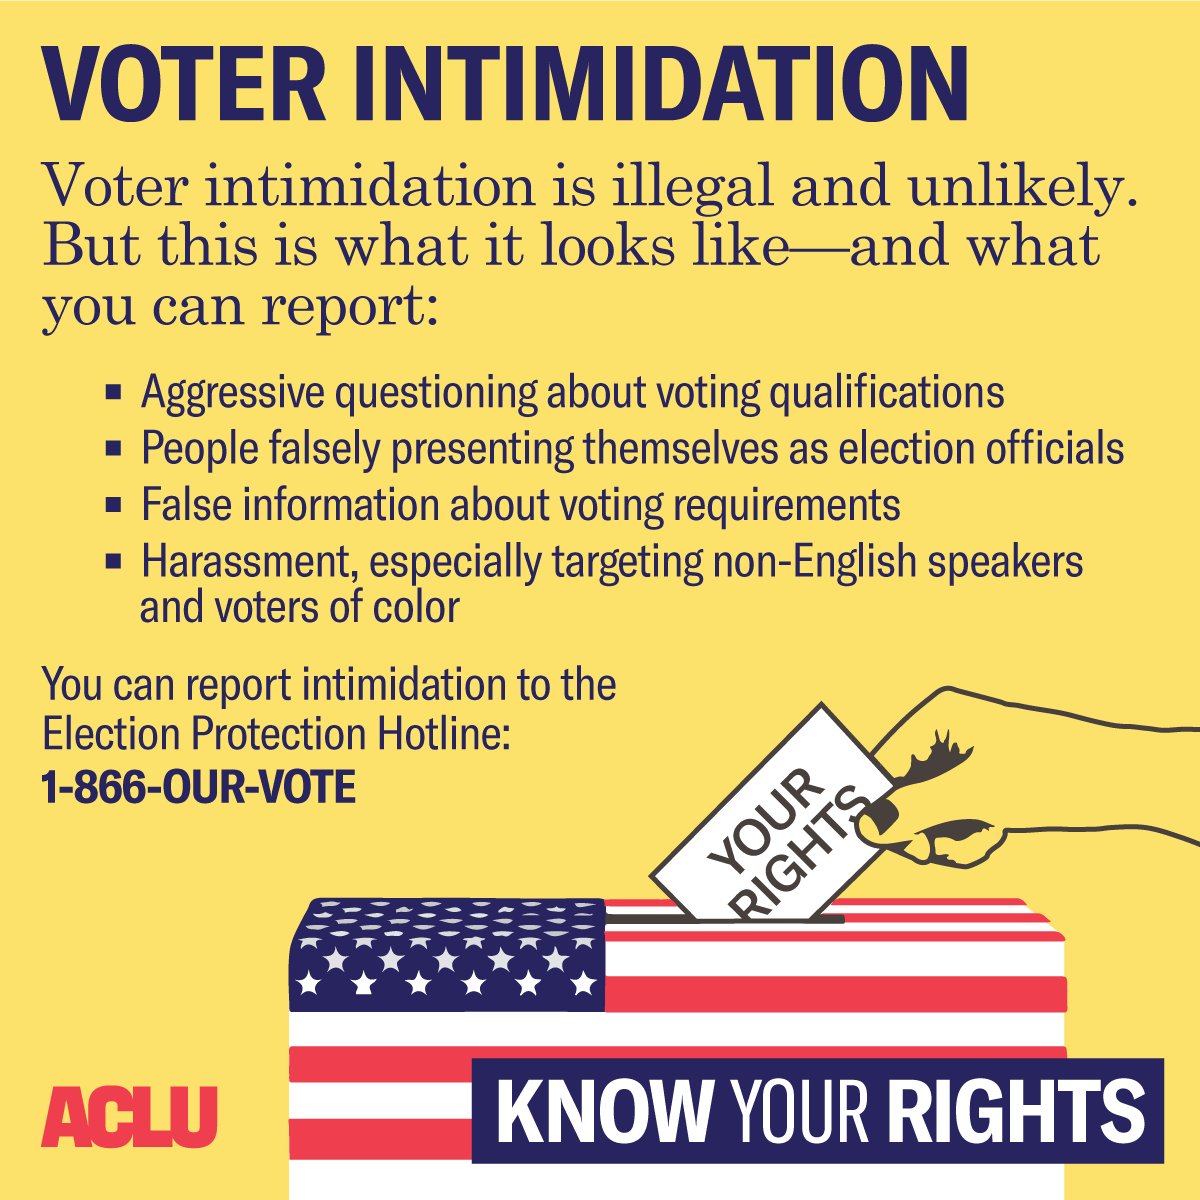 RT @ACLU: Today is #ElectionDay — know how to spot voter intimidation and what to do if it happens. https://t.co/7WOpDkkccg